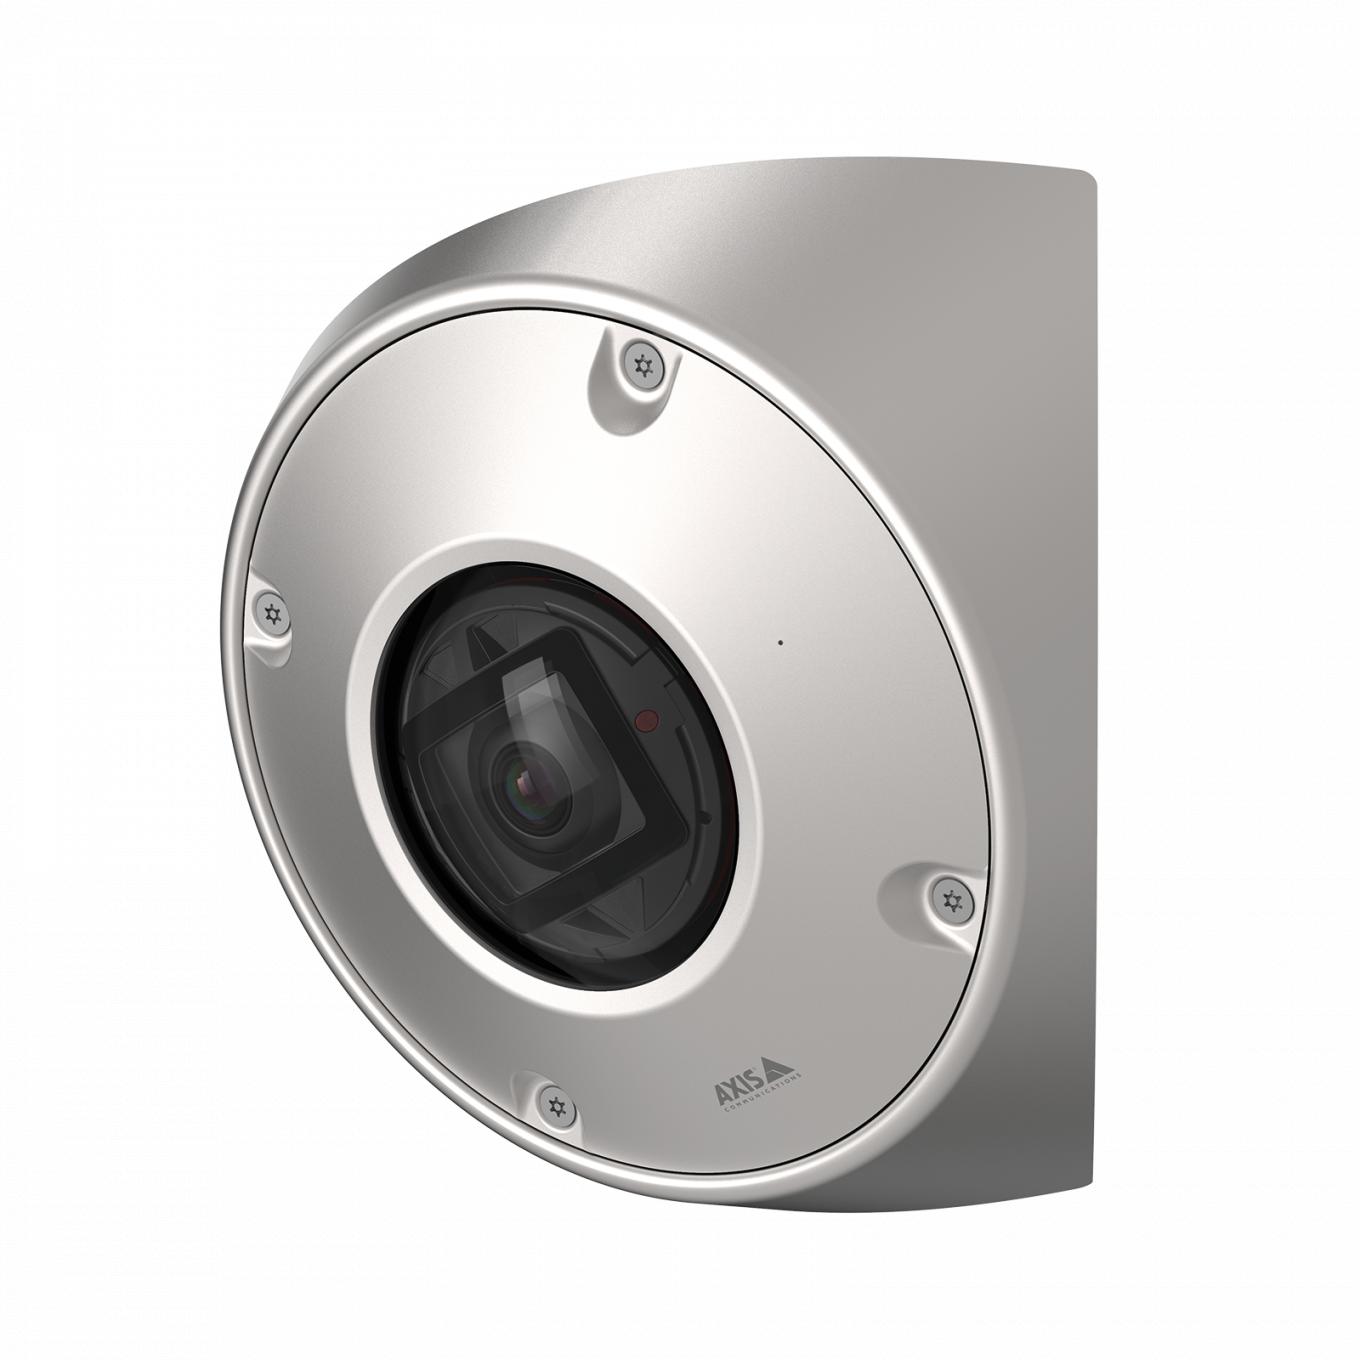 AXIS Q9216-SLV Network Camera | Axis Communications